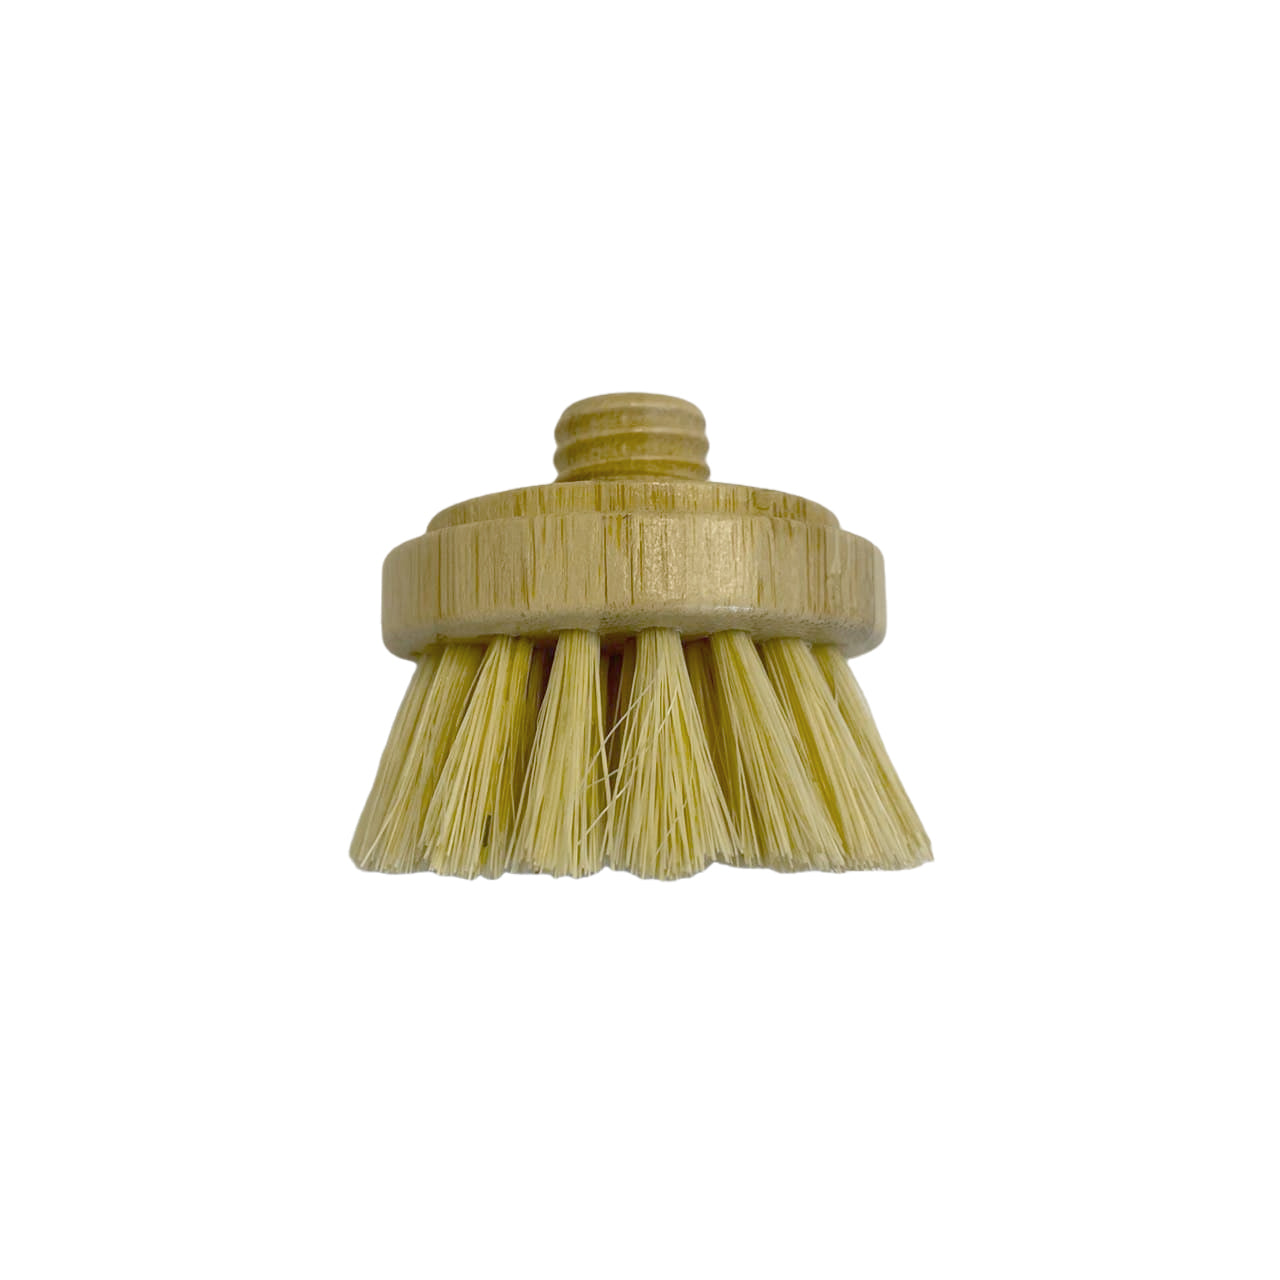 Bamboo Long & Knob Handle Cleaning Brush Set Sisal Palm Fiber Scrubber Interchangeable Detachable Replacement Head